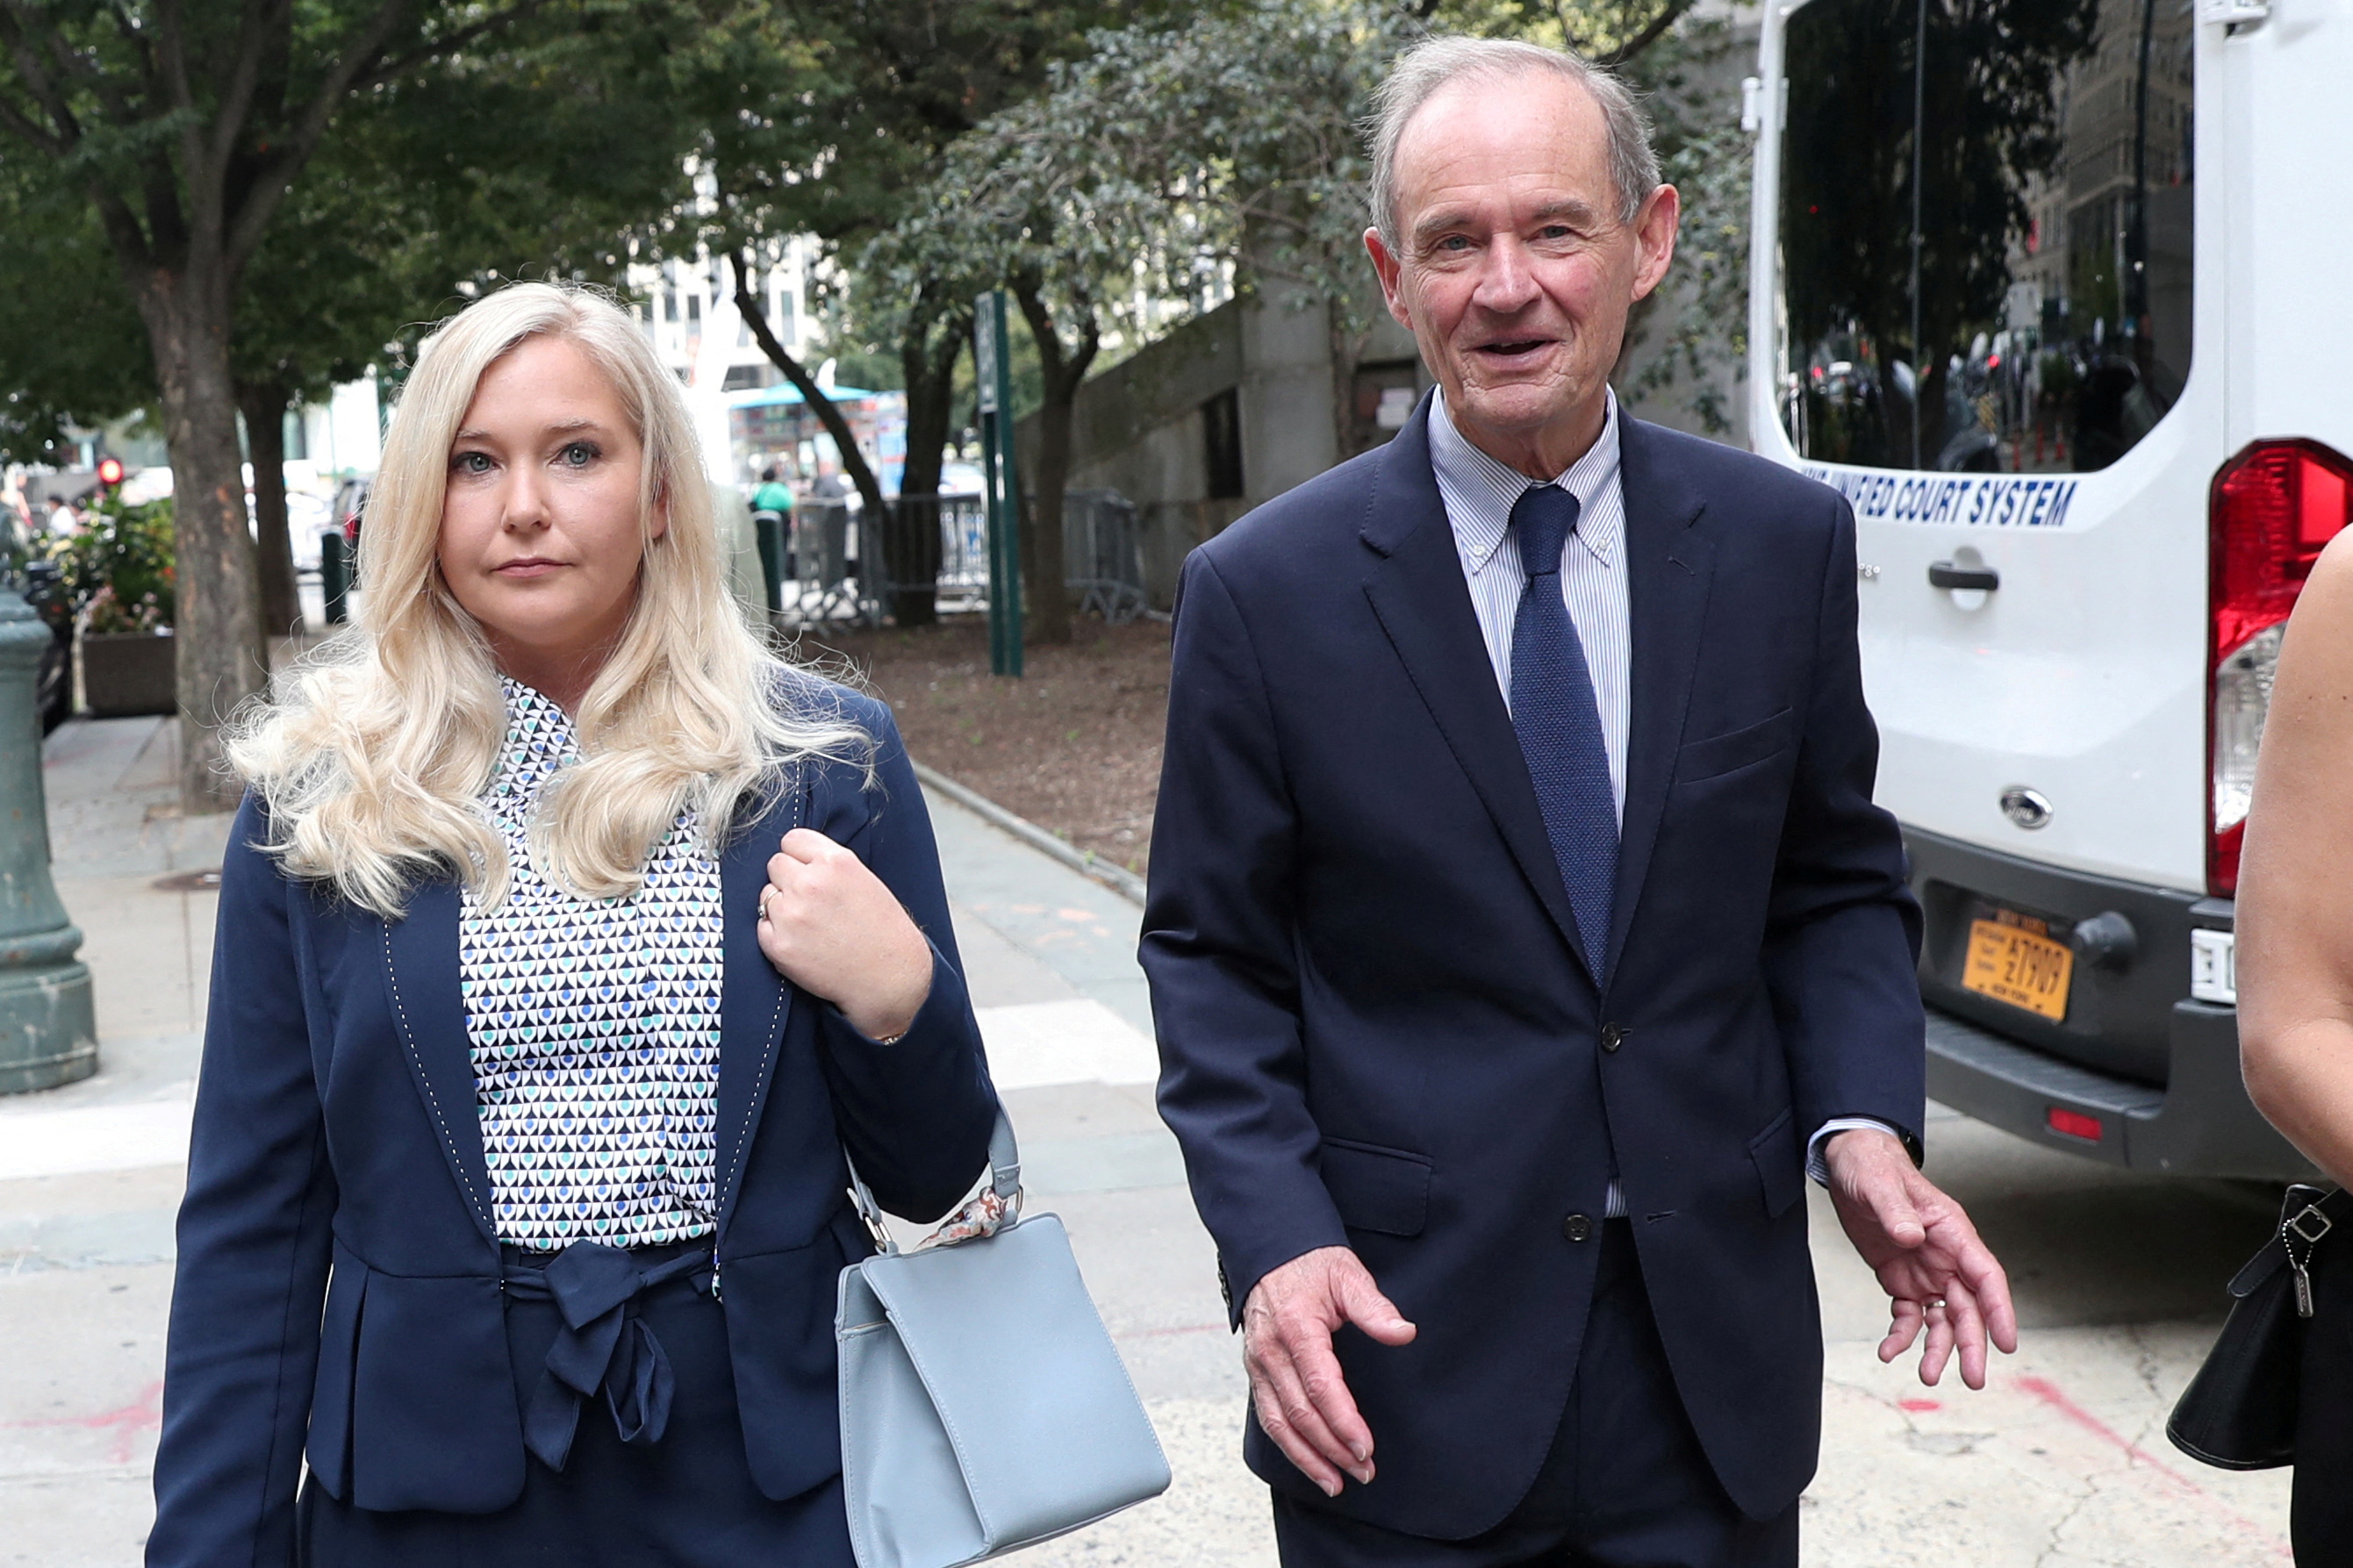 Lawyer David Boies arrives with his client Virginia Giuffre for hearing in the criminal case against Jeffrey Epstein, at Federal Court in New York